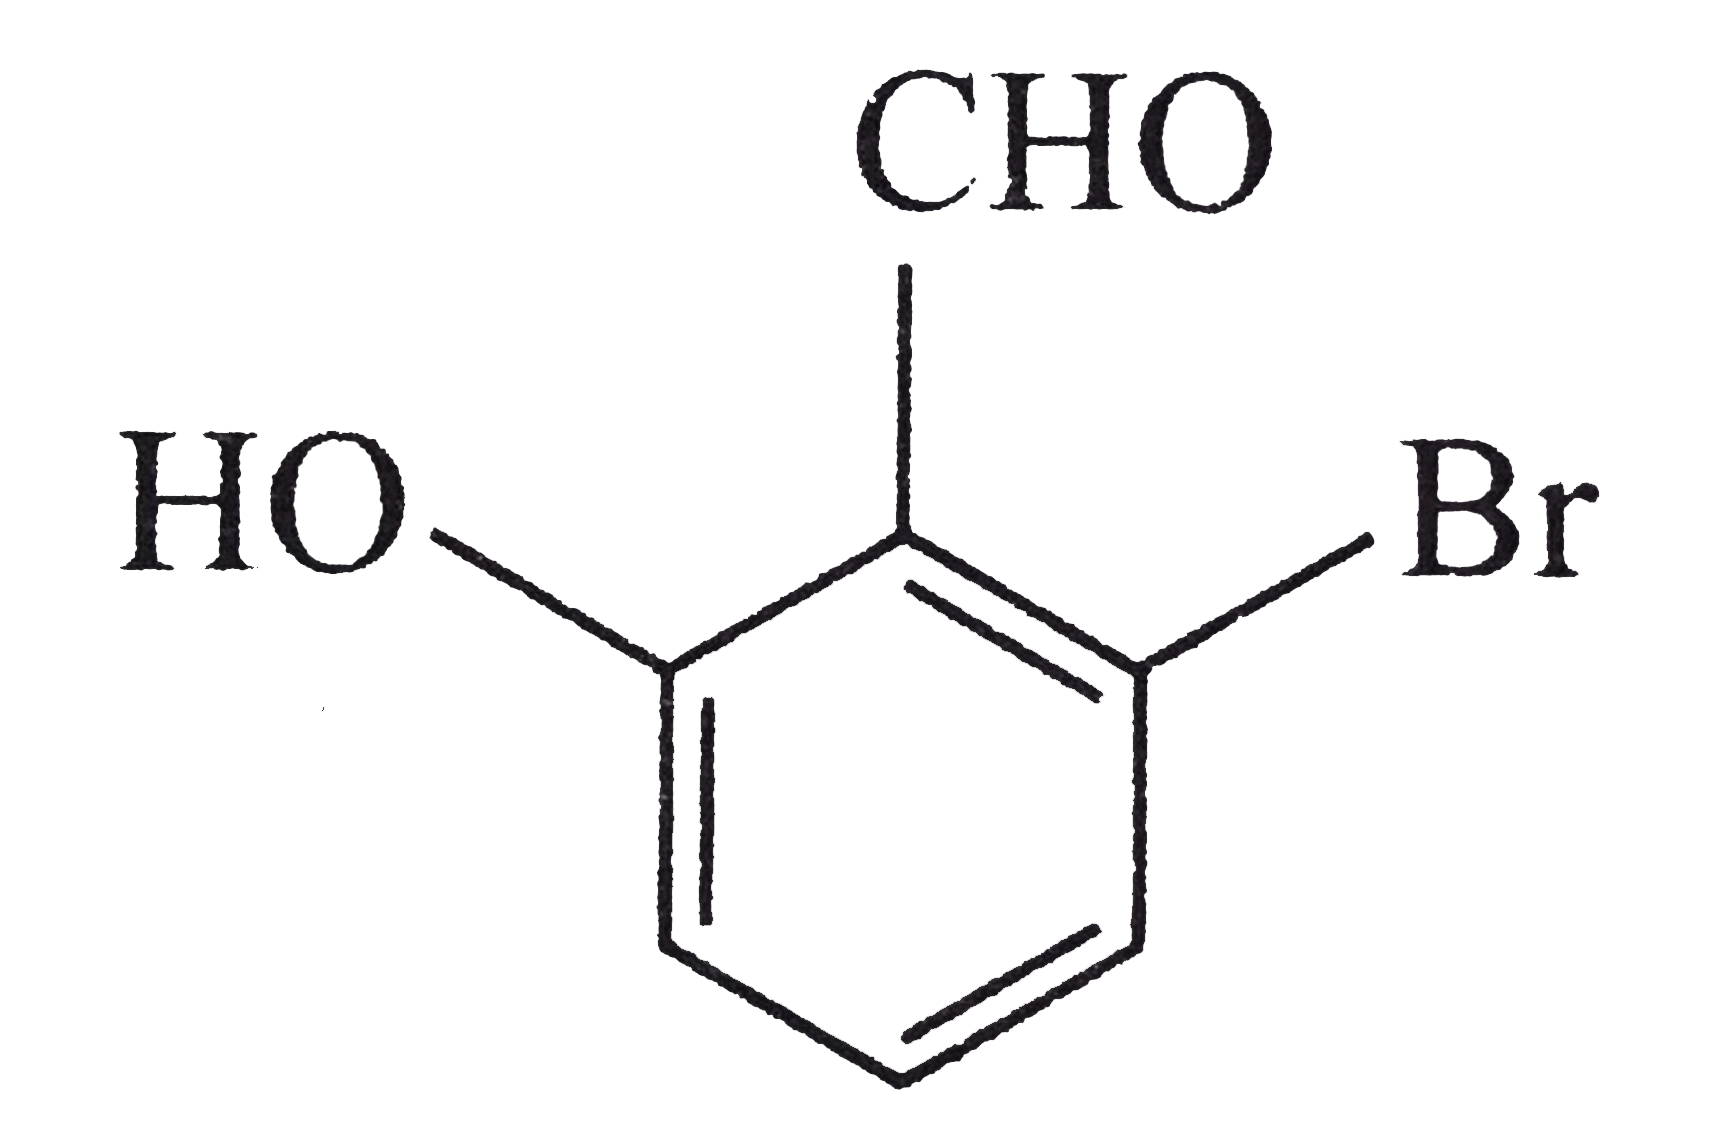 What is the correct IUPAC name of the compound given below?